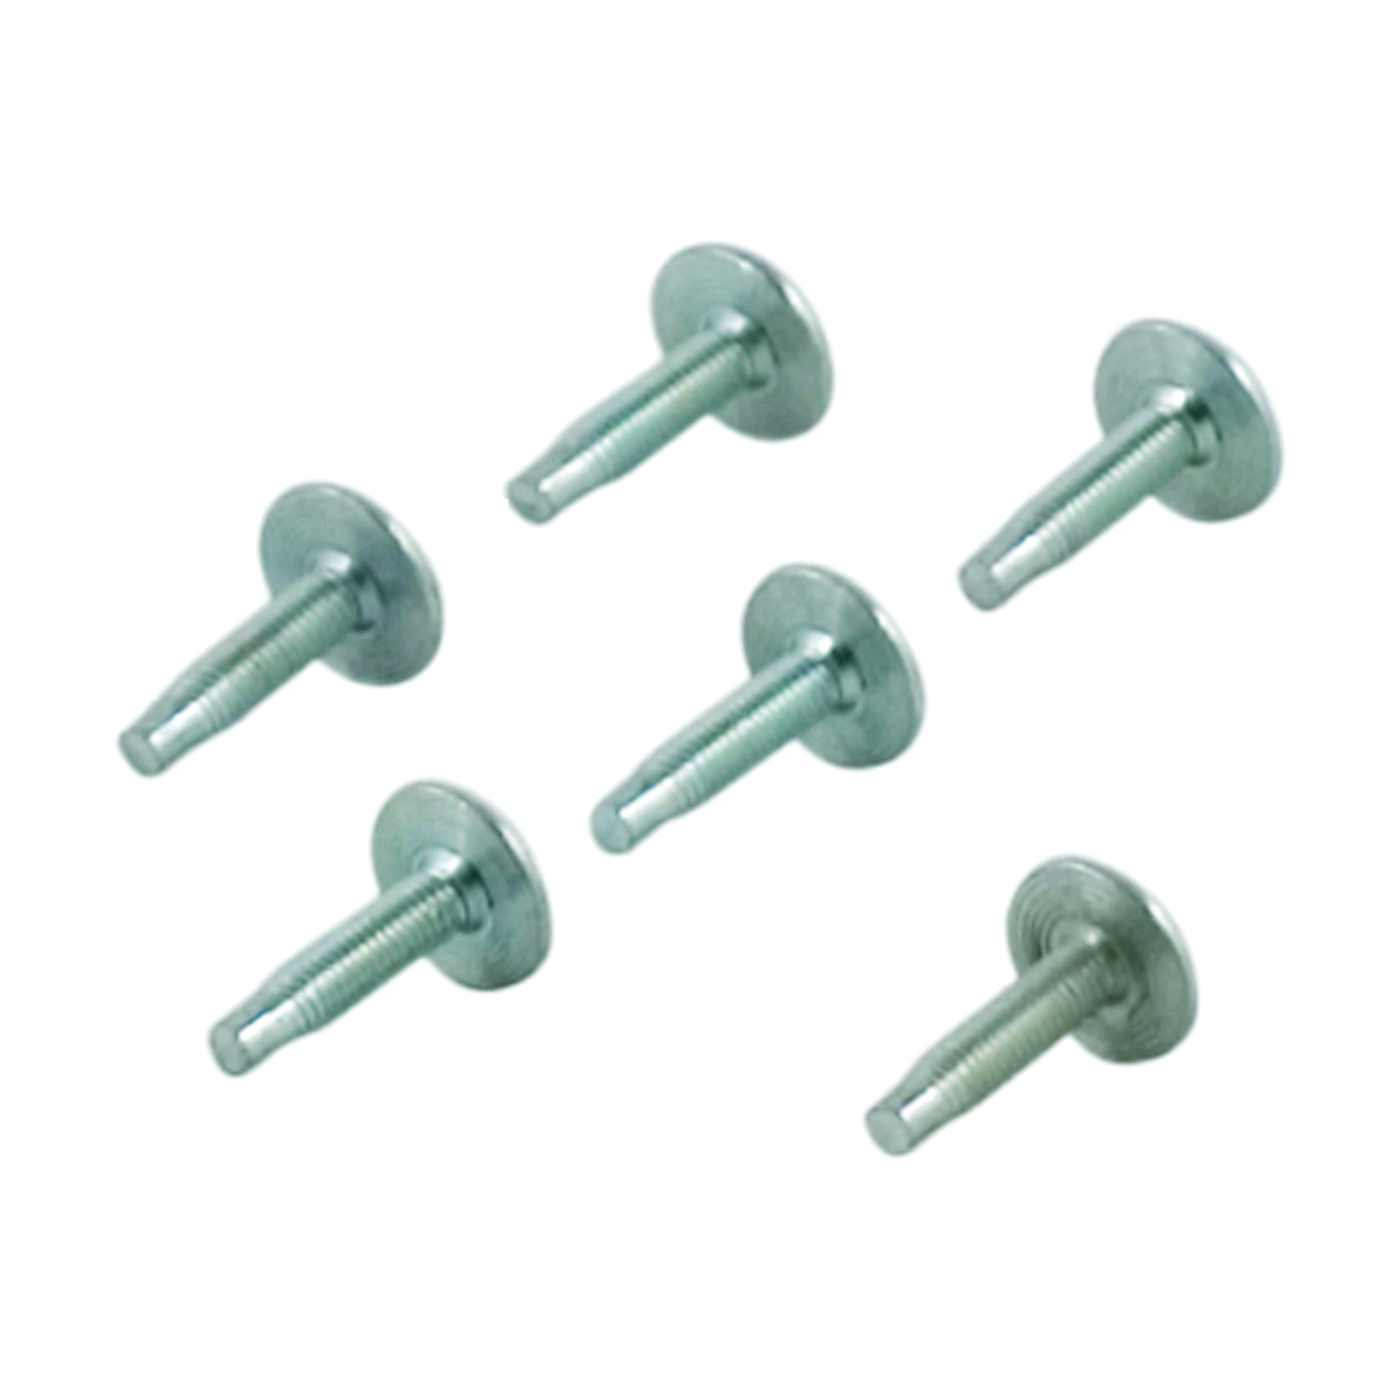 Square D S106 Replacement Screw, For: QO, Homeline Load Center, 6 -Piece - 1